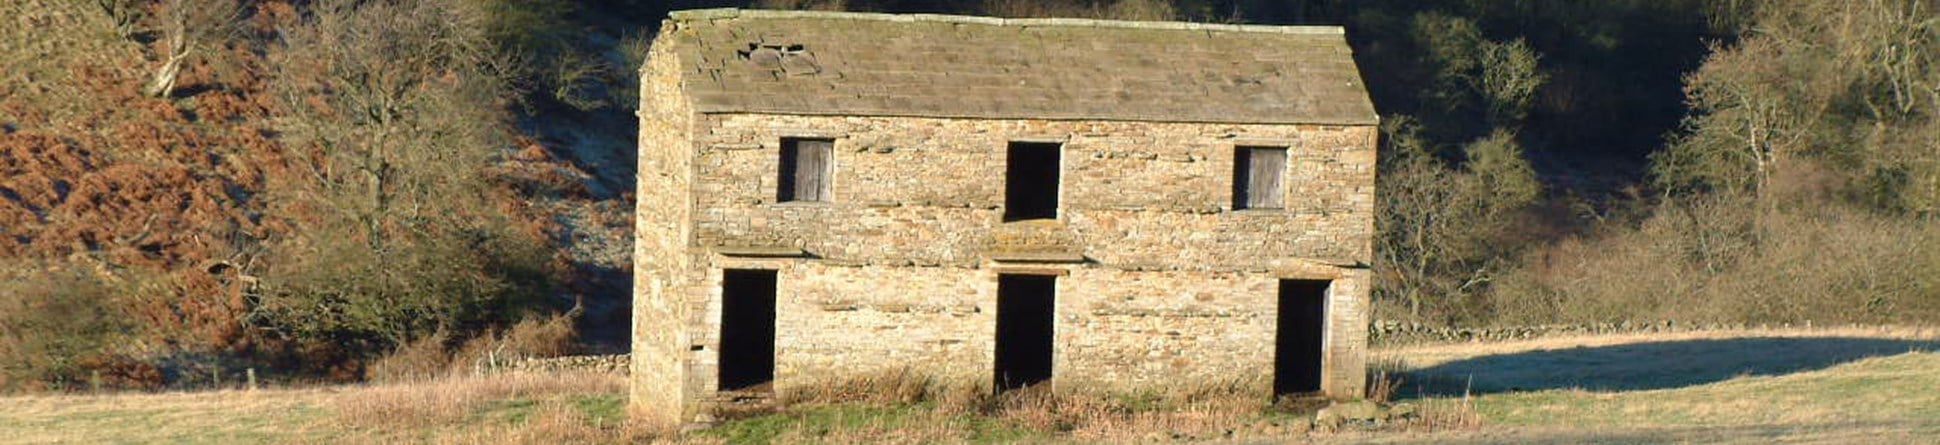 Derelict farm building in the middle of a meadow with bare winter woodland in the  background.